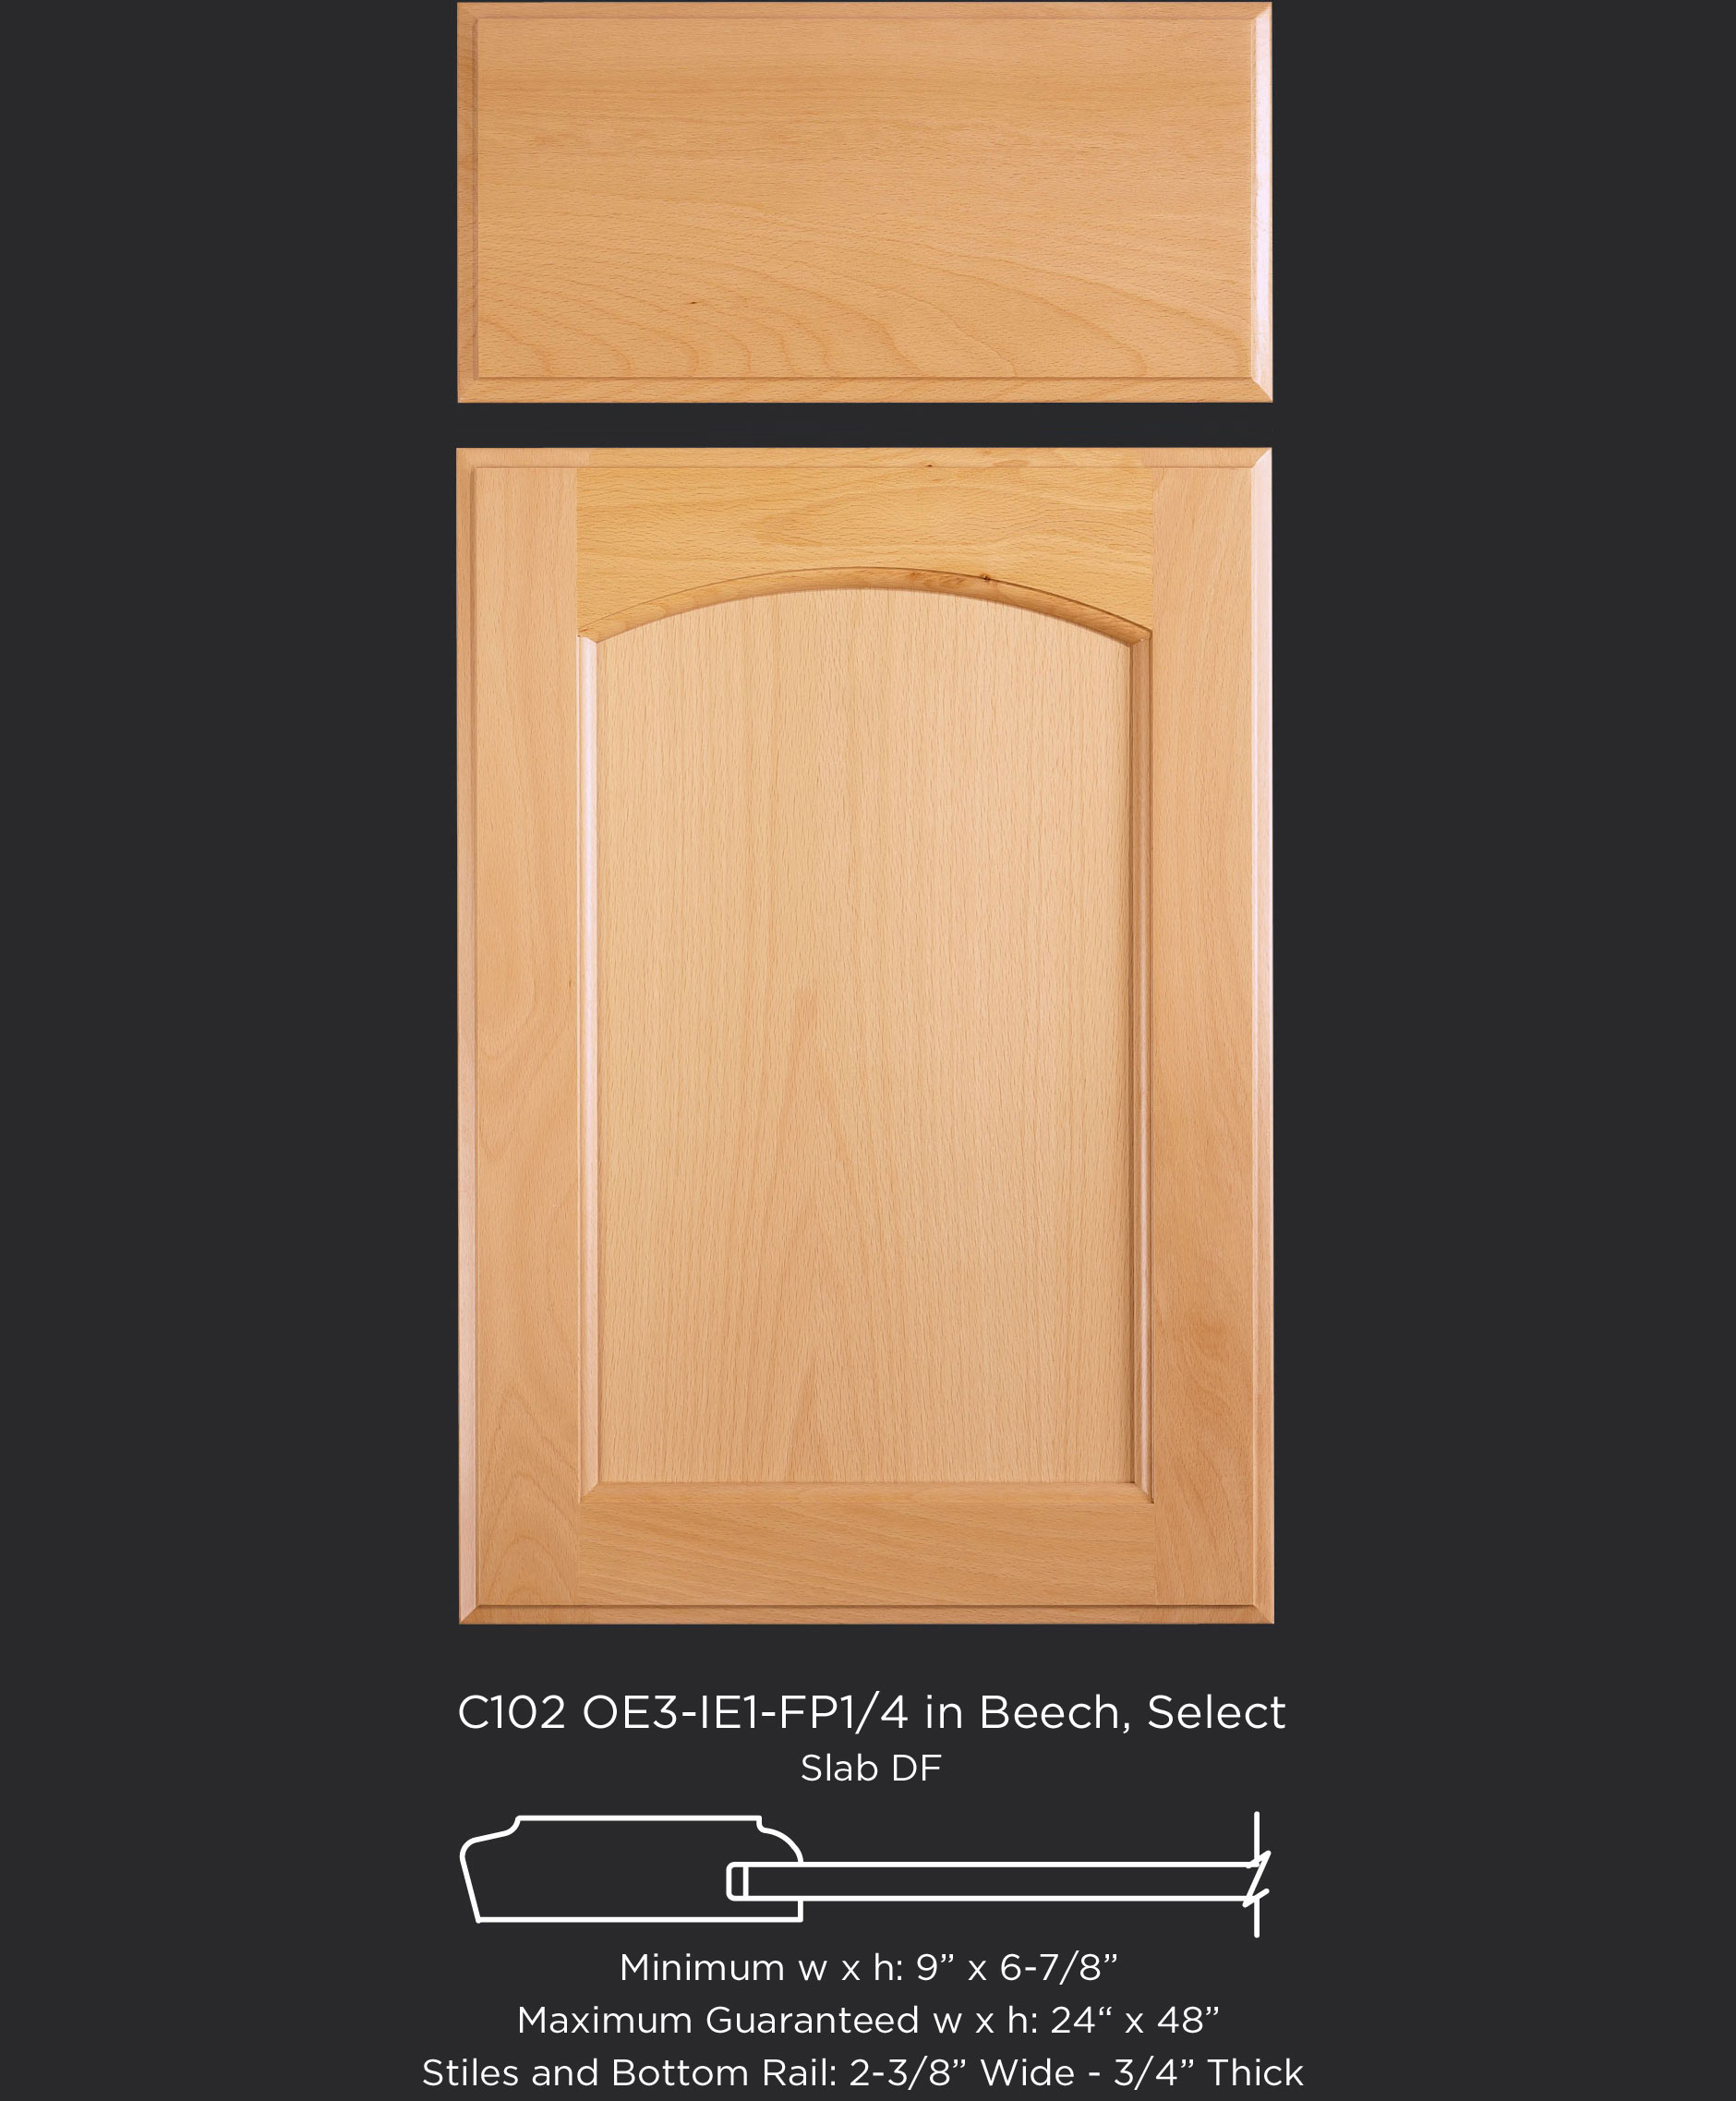 Cope and Stick Cabinet Door C102-OE3-IE1-FP1/4 in Beech, Select and slab drawer front with OE3